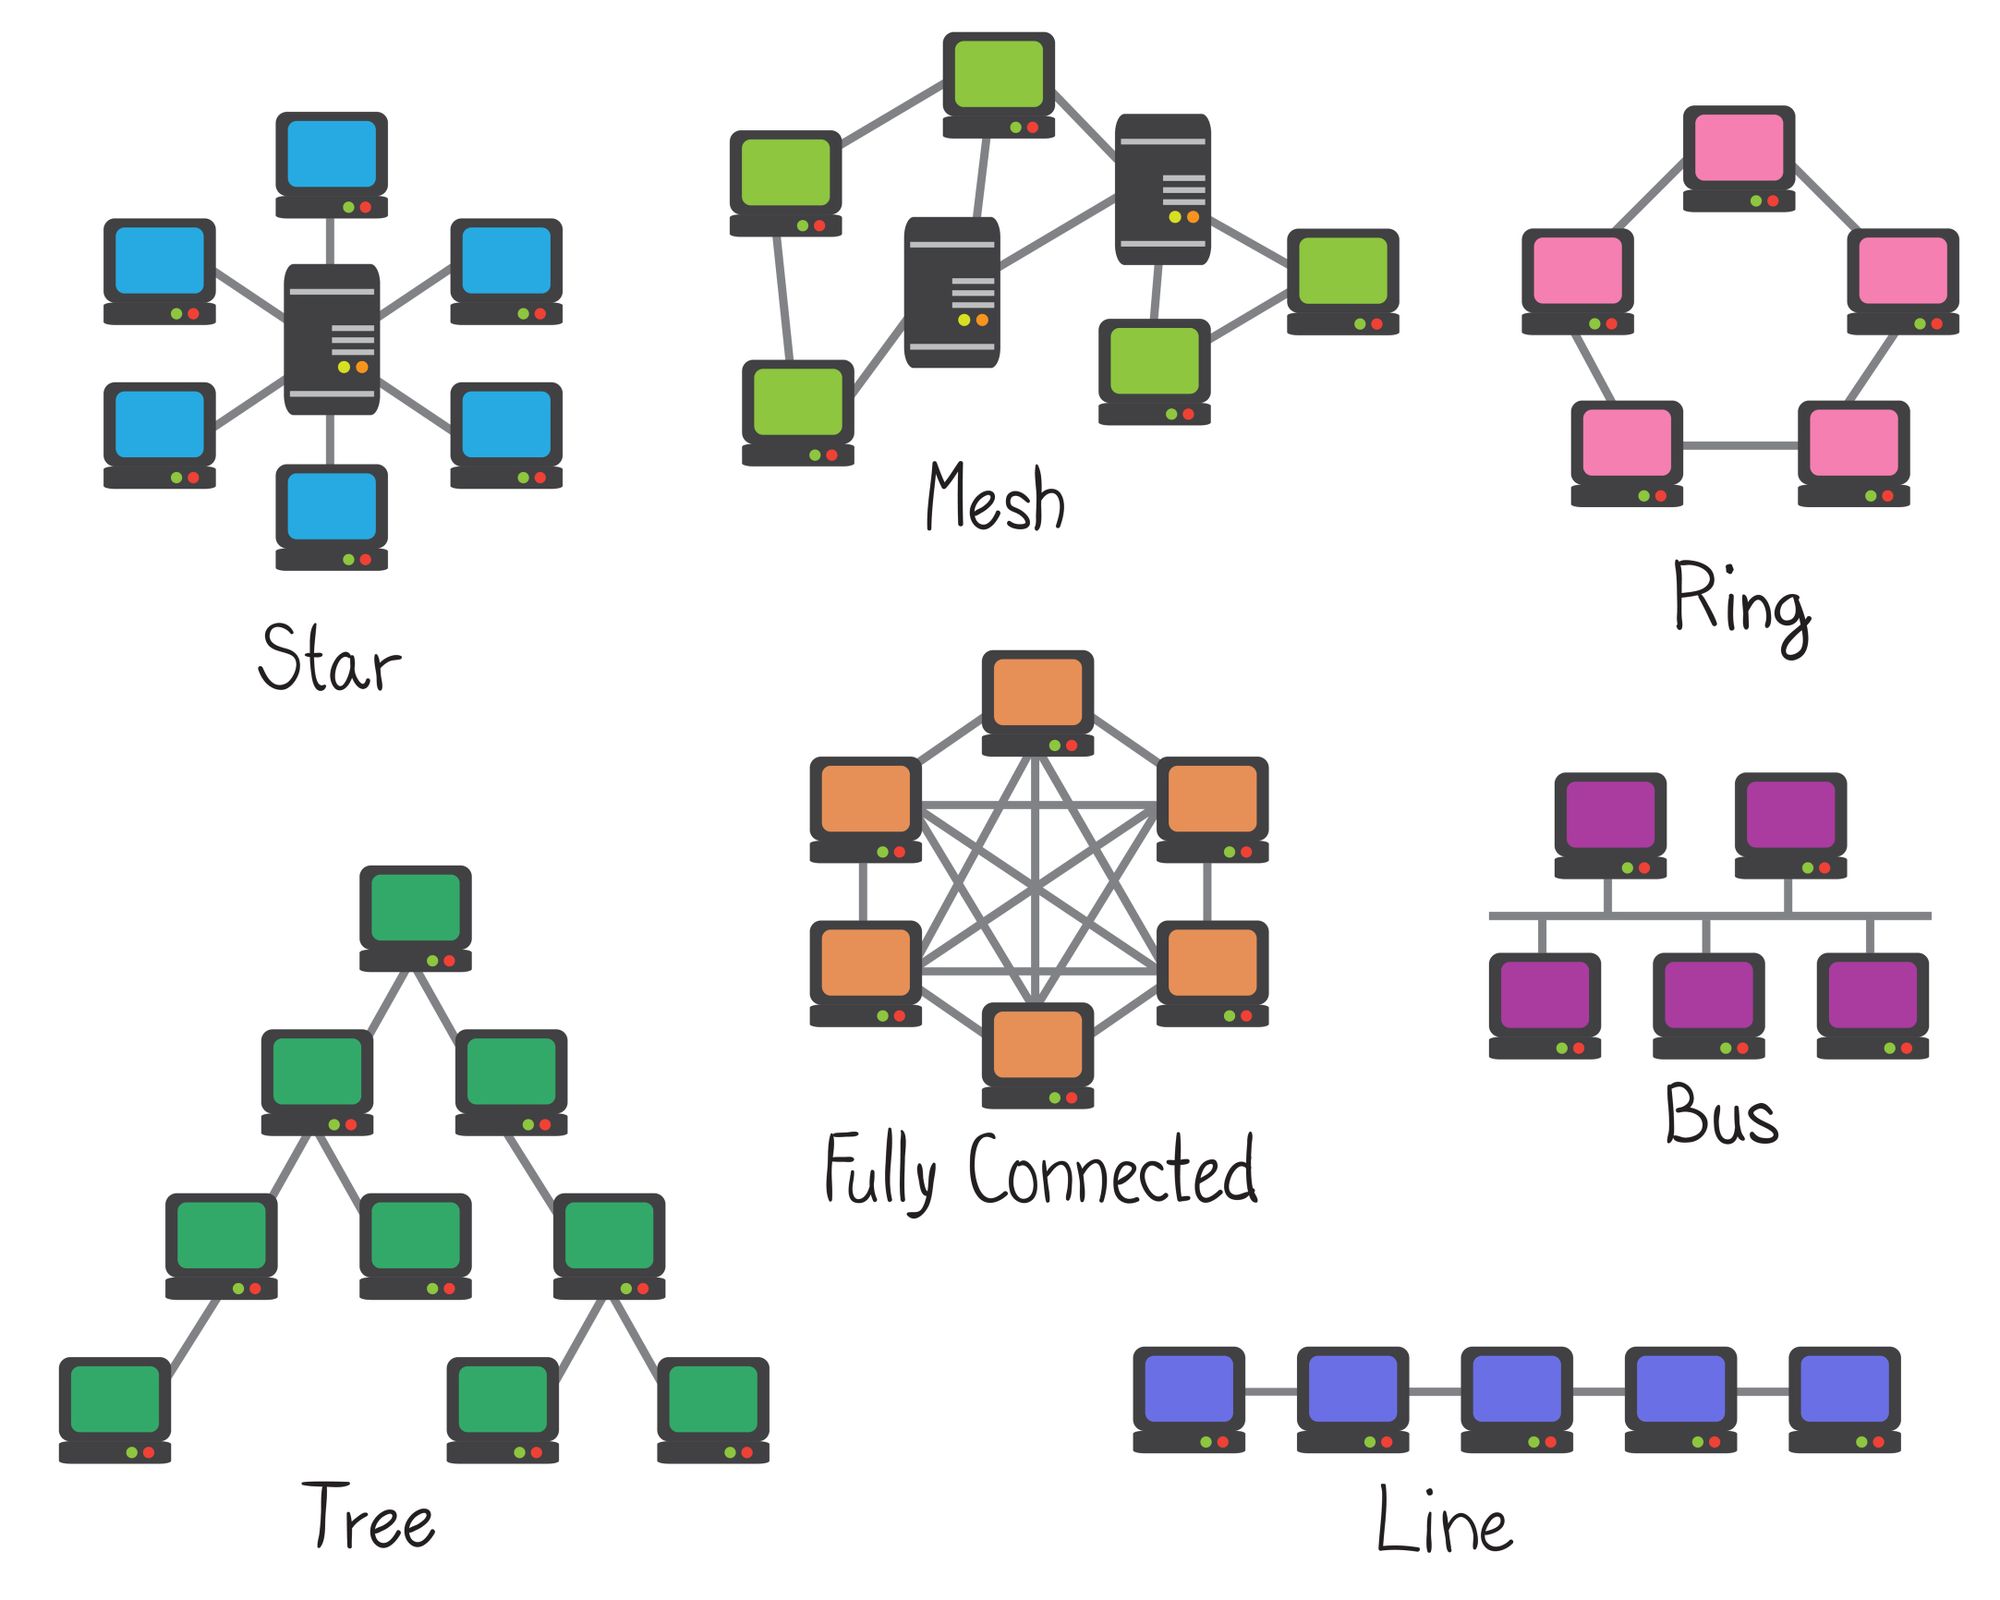 Using nodes and links, you can map out how both computers and people form relationships with each other. Image Source: Adobe Stock/kytalpa